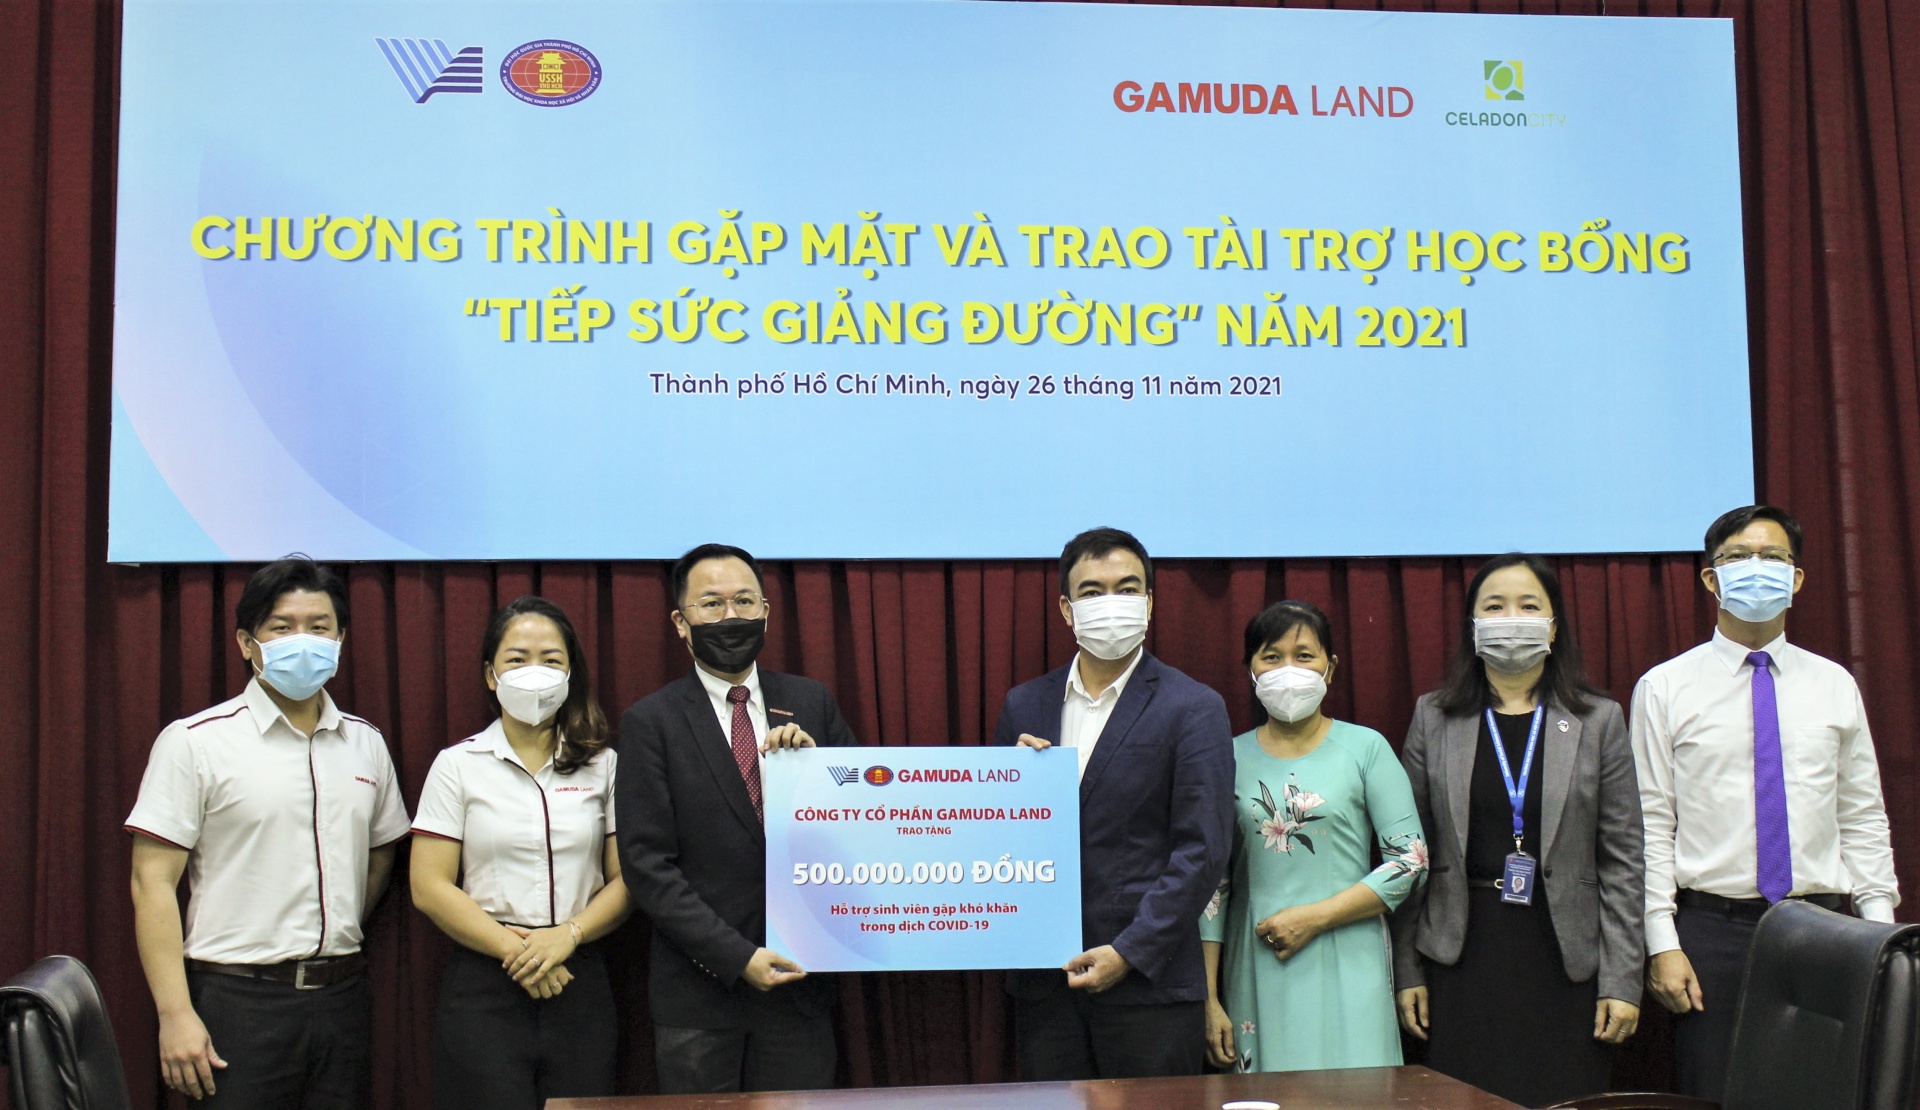 gamuda land grants back to school scholarships to support disadvantaged students